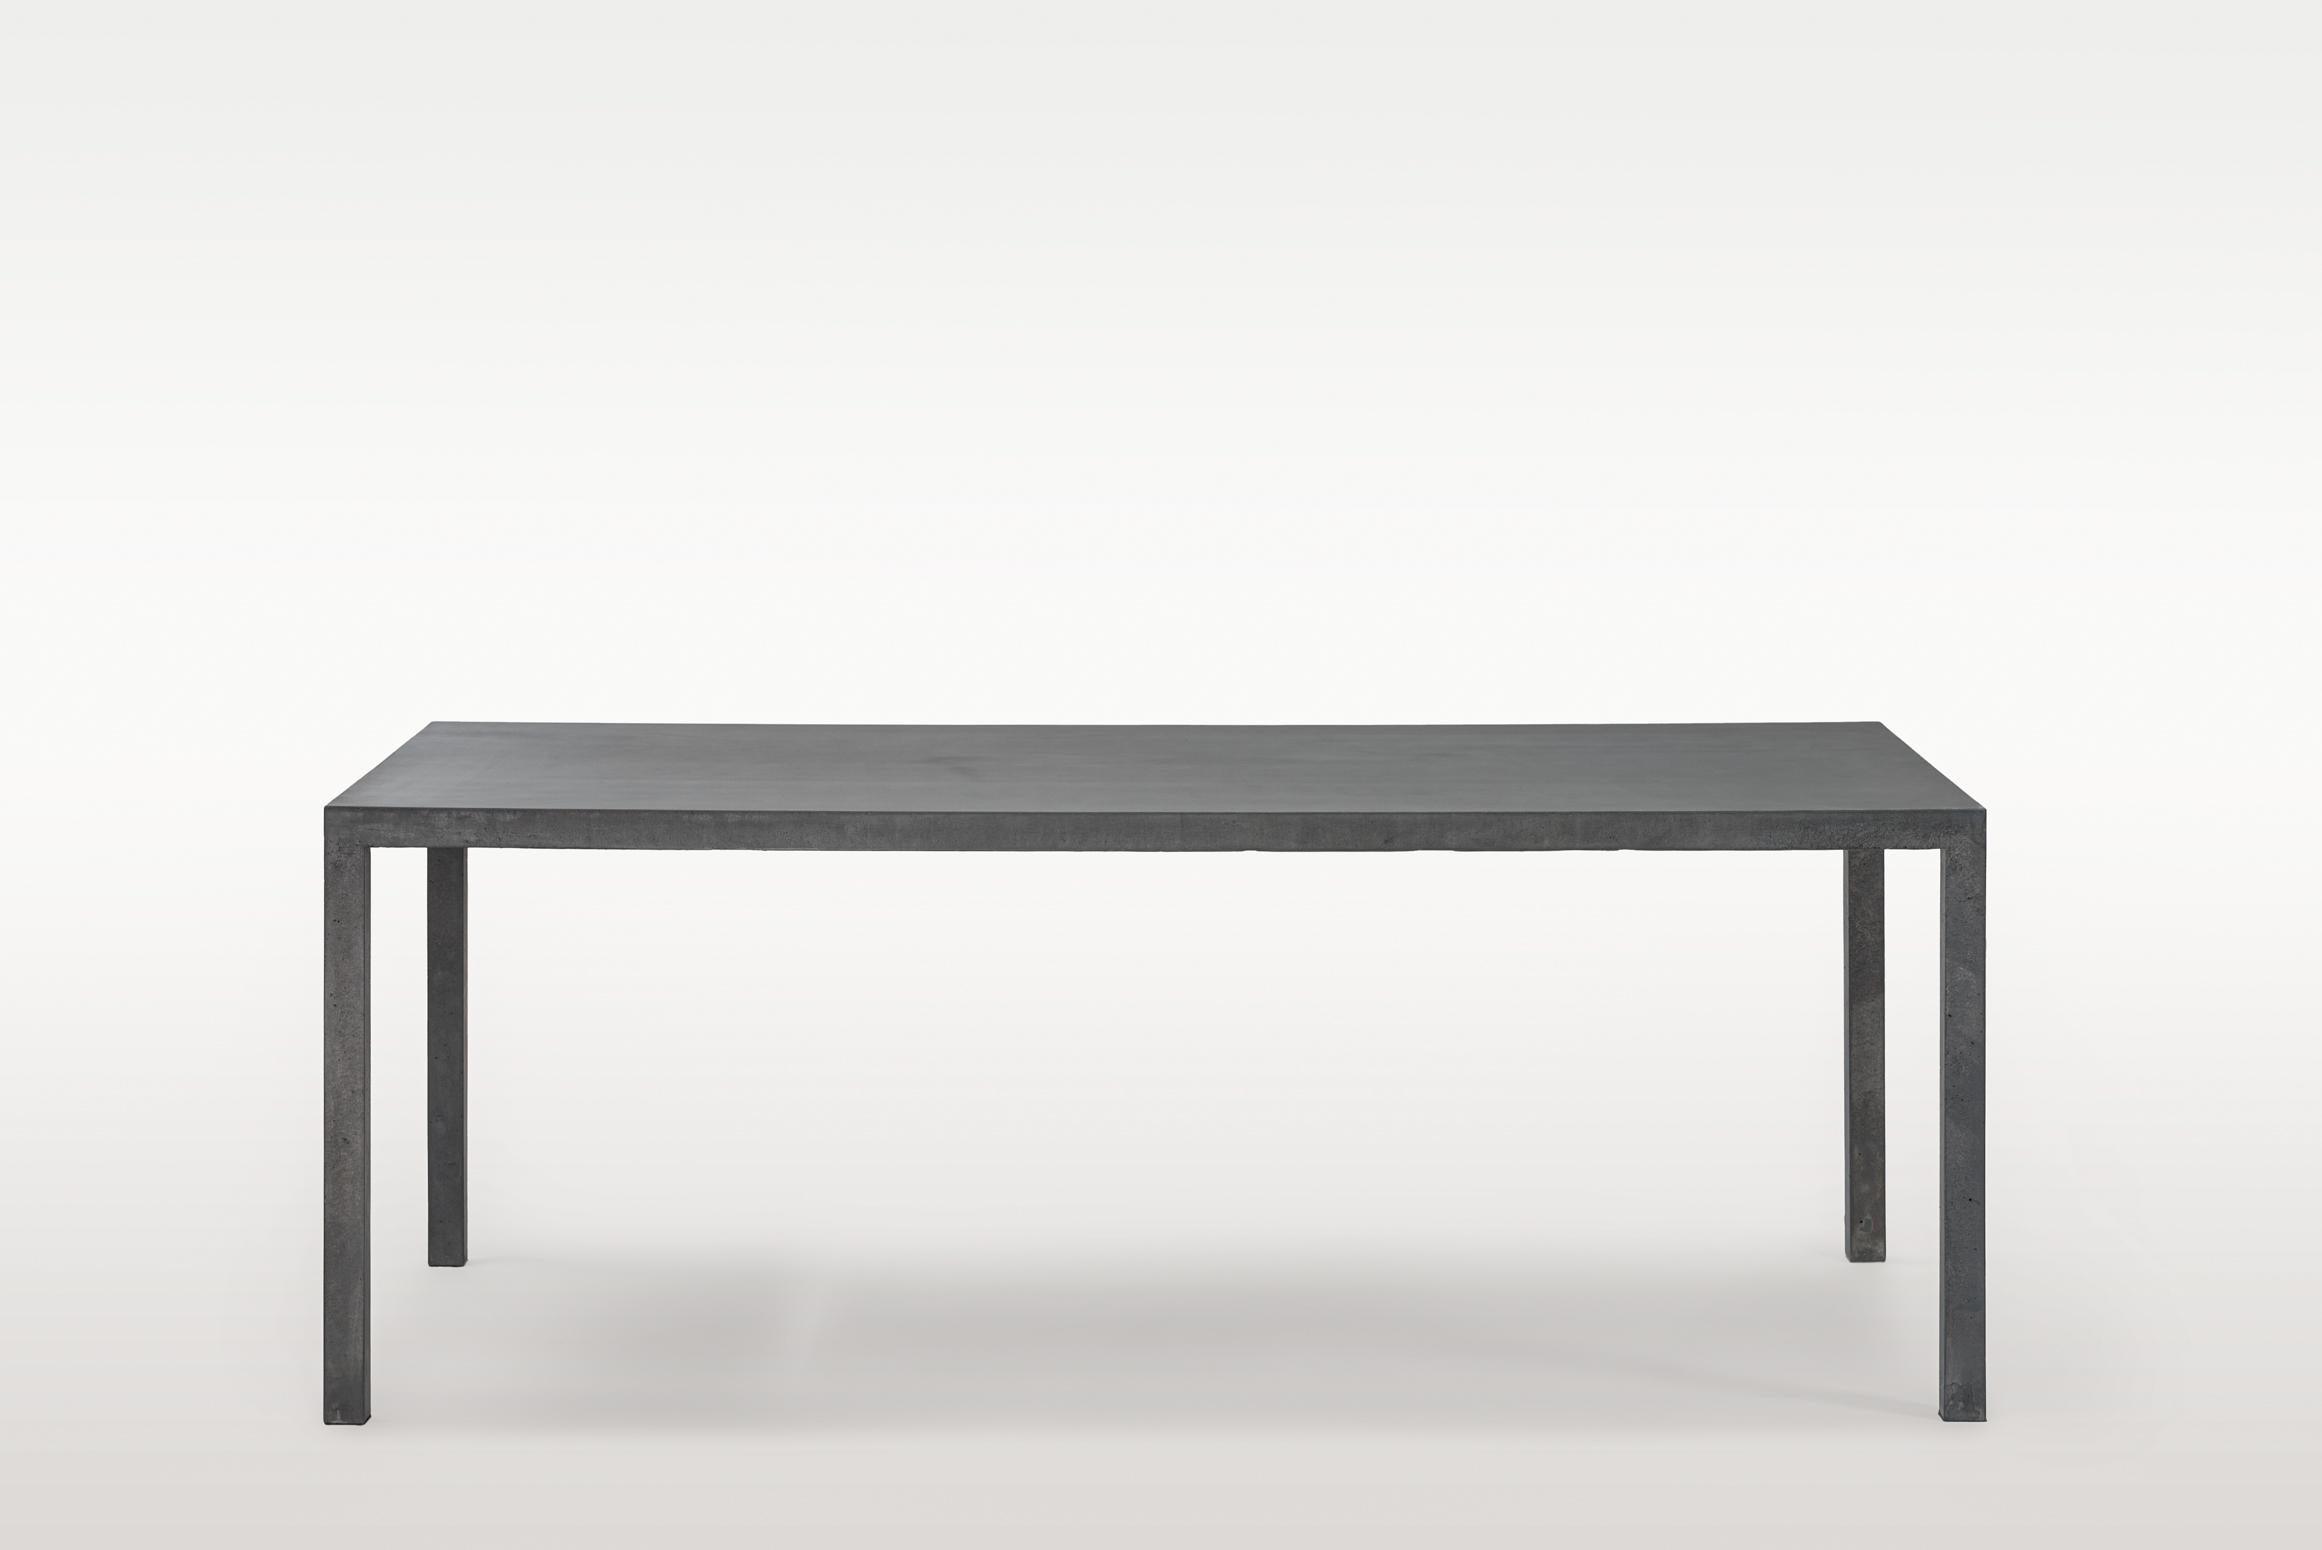 Italian 21St Century 50MM Dining Table - Single Cast of Concrete 100% handmade in Italy For Sale